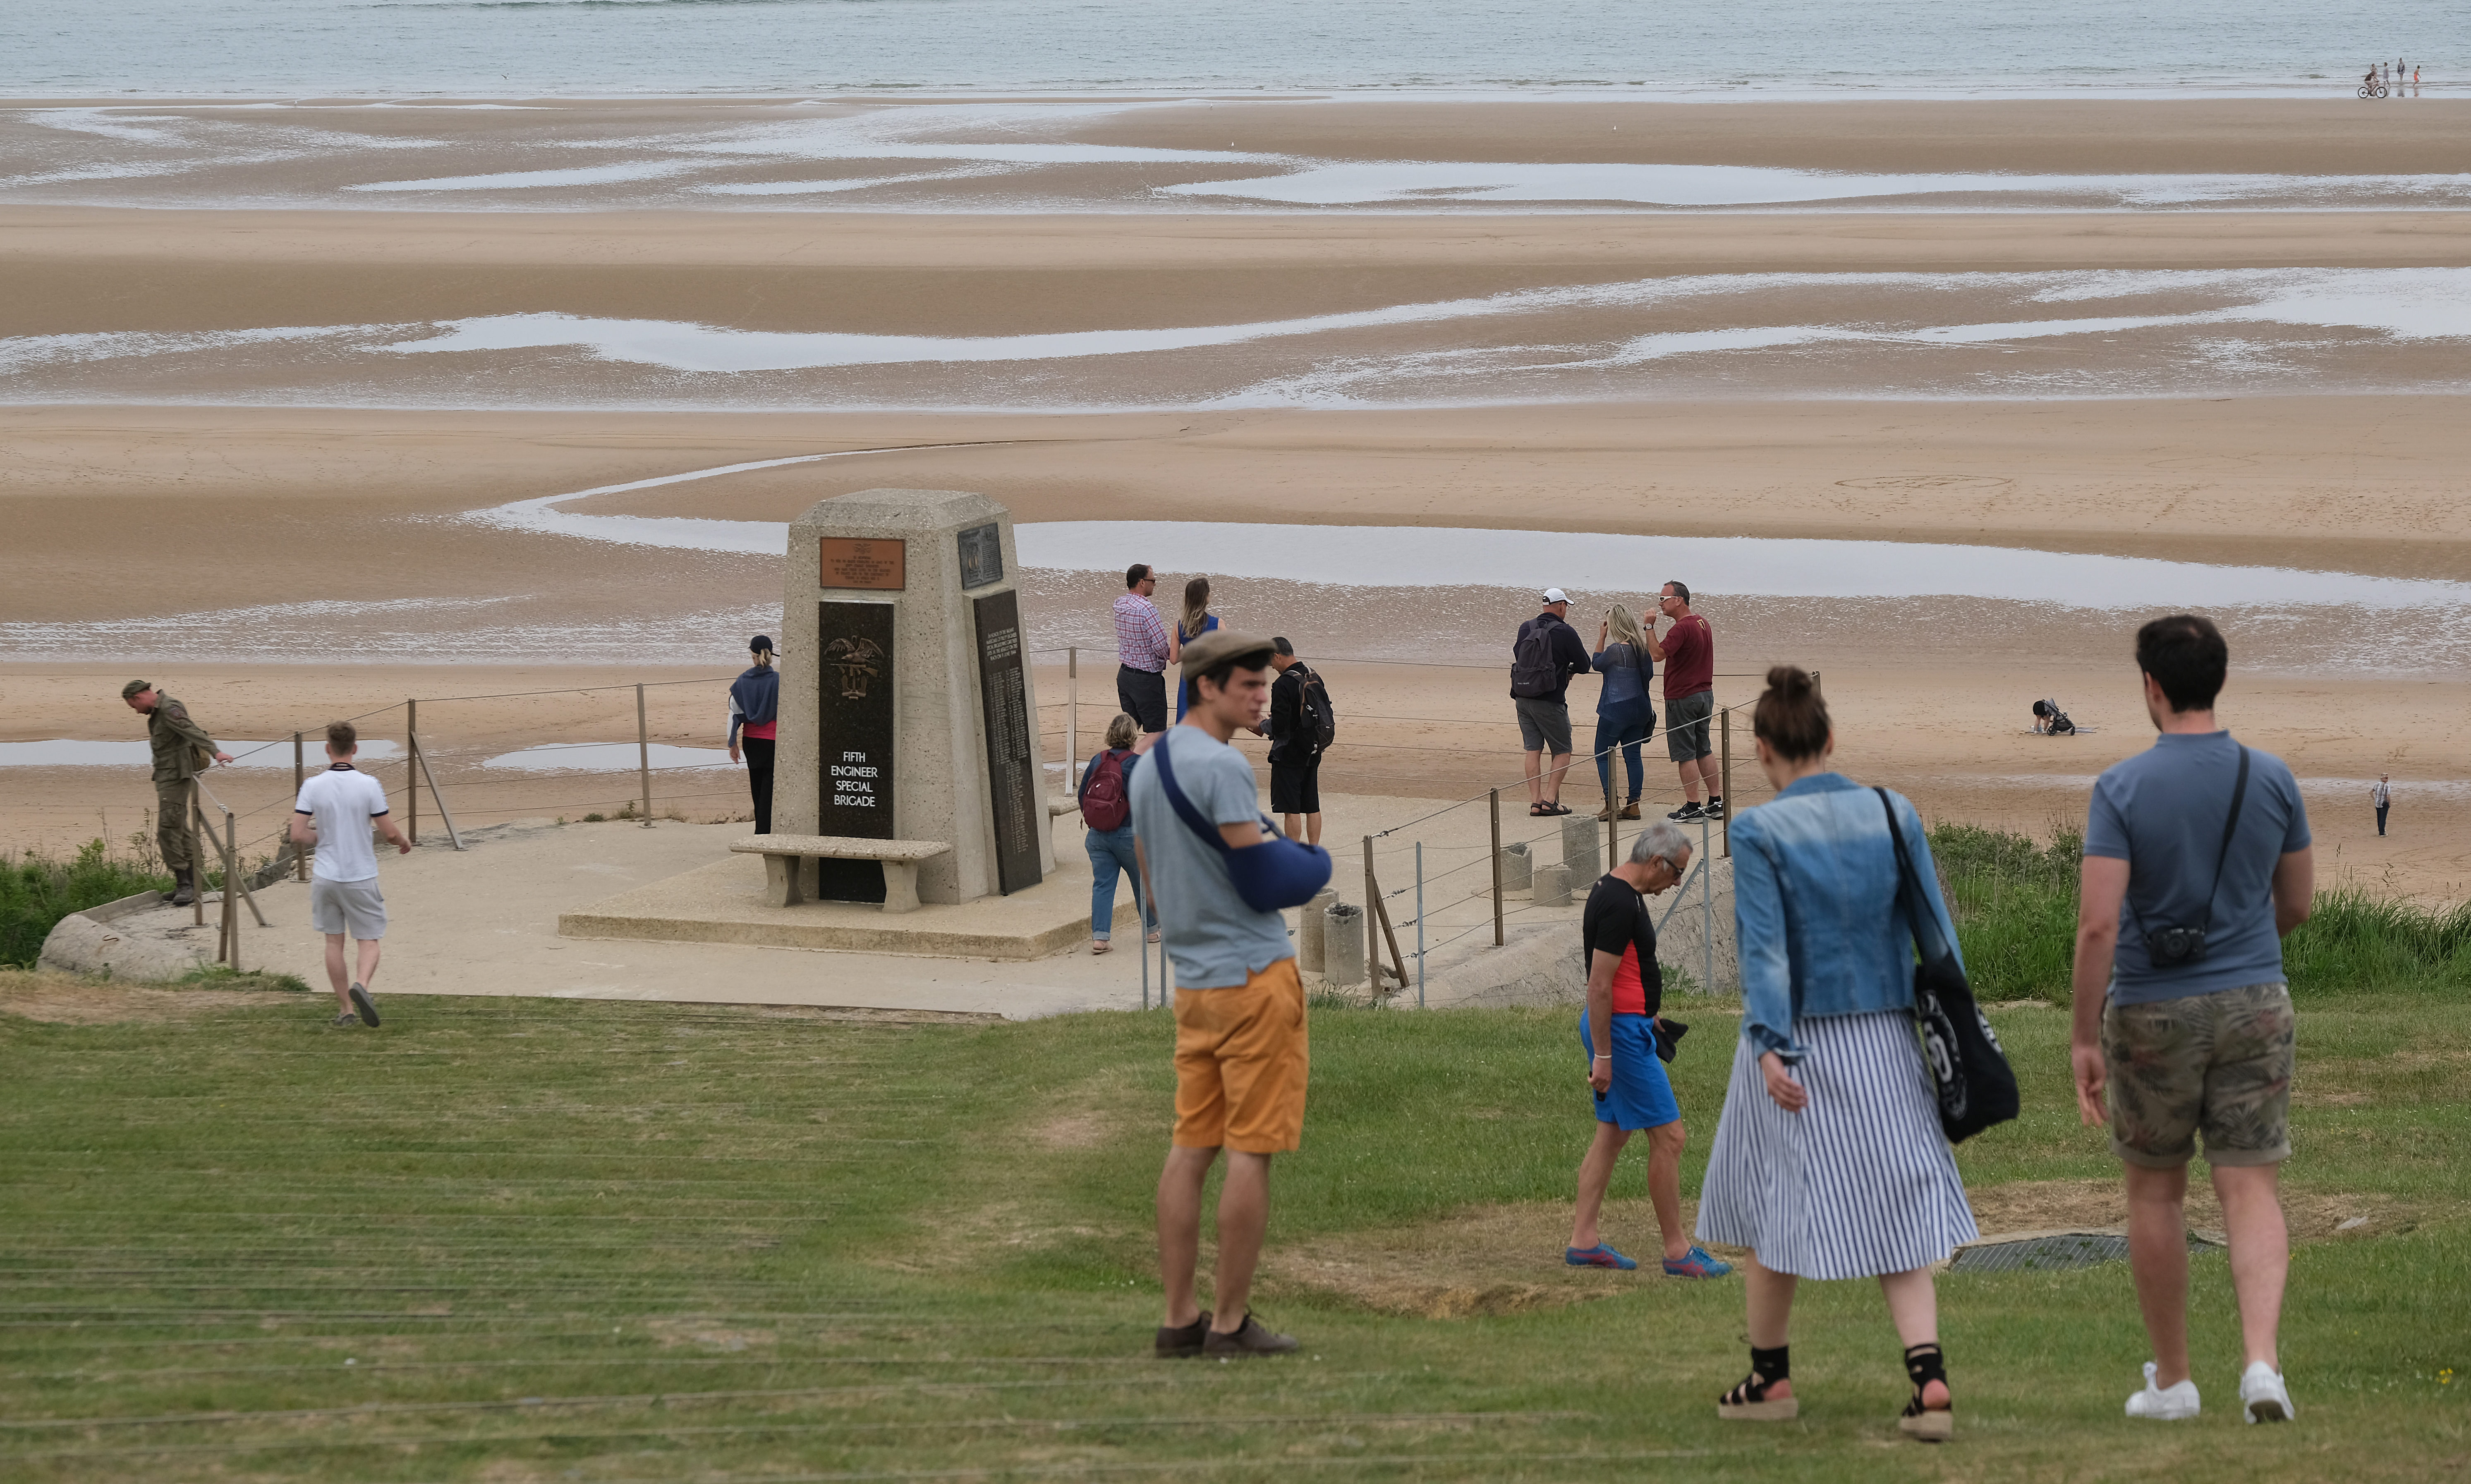 Visitors walk toward a monument to the soldiers of a US unit killed in the D-Day assault at Omaha Beach in Normandy on June 02, 2019 near Colleville-sur-Mer, France.